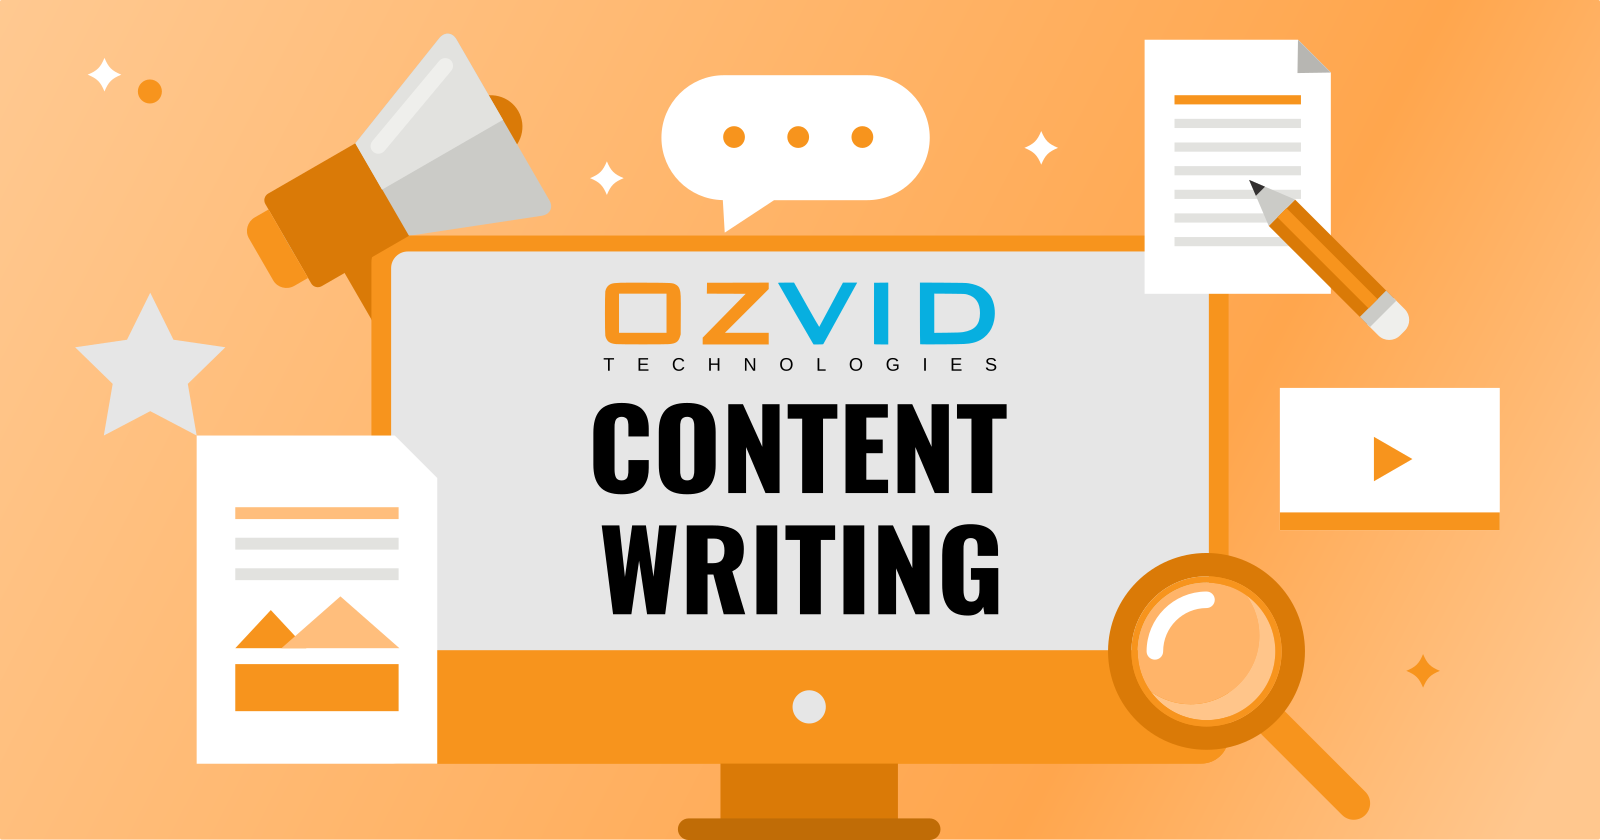 Role of Content Writing in Digital Marketing